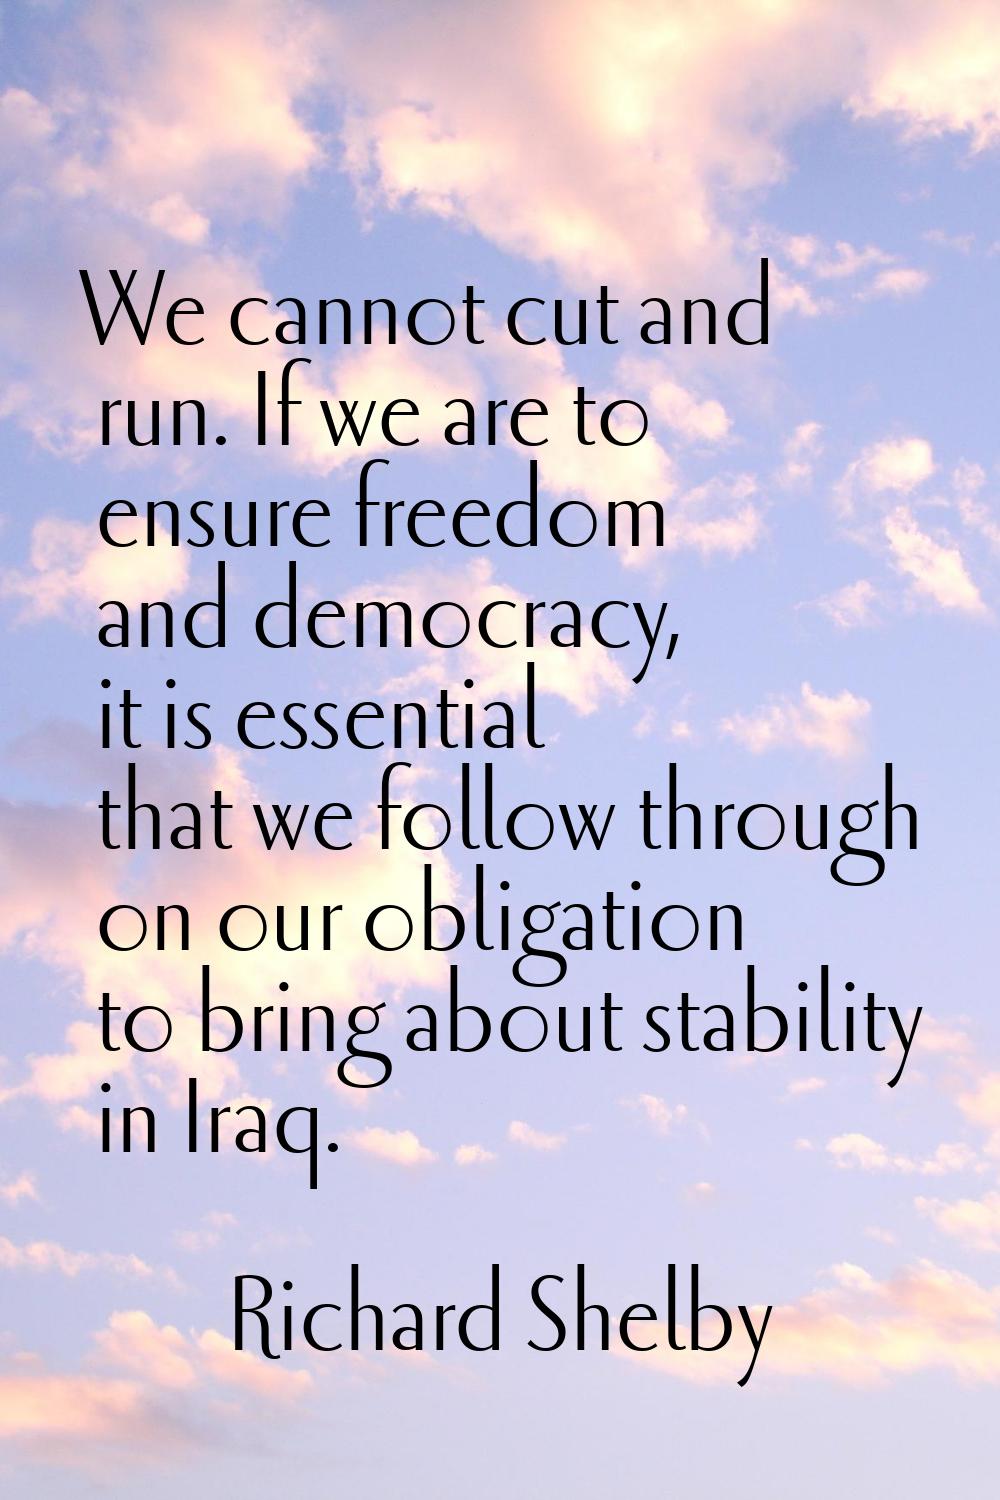 We cannot cut and run. If we are to ensure freedom and democracy, it is essential that we follow th